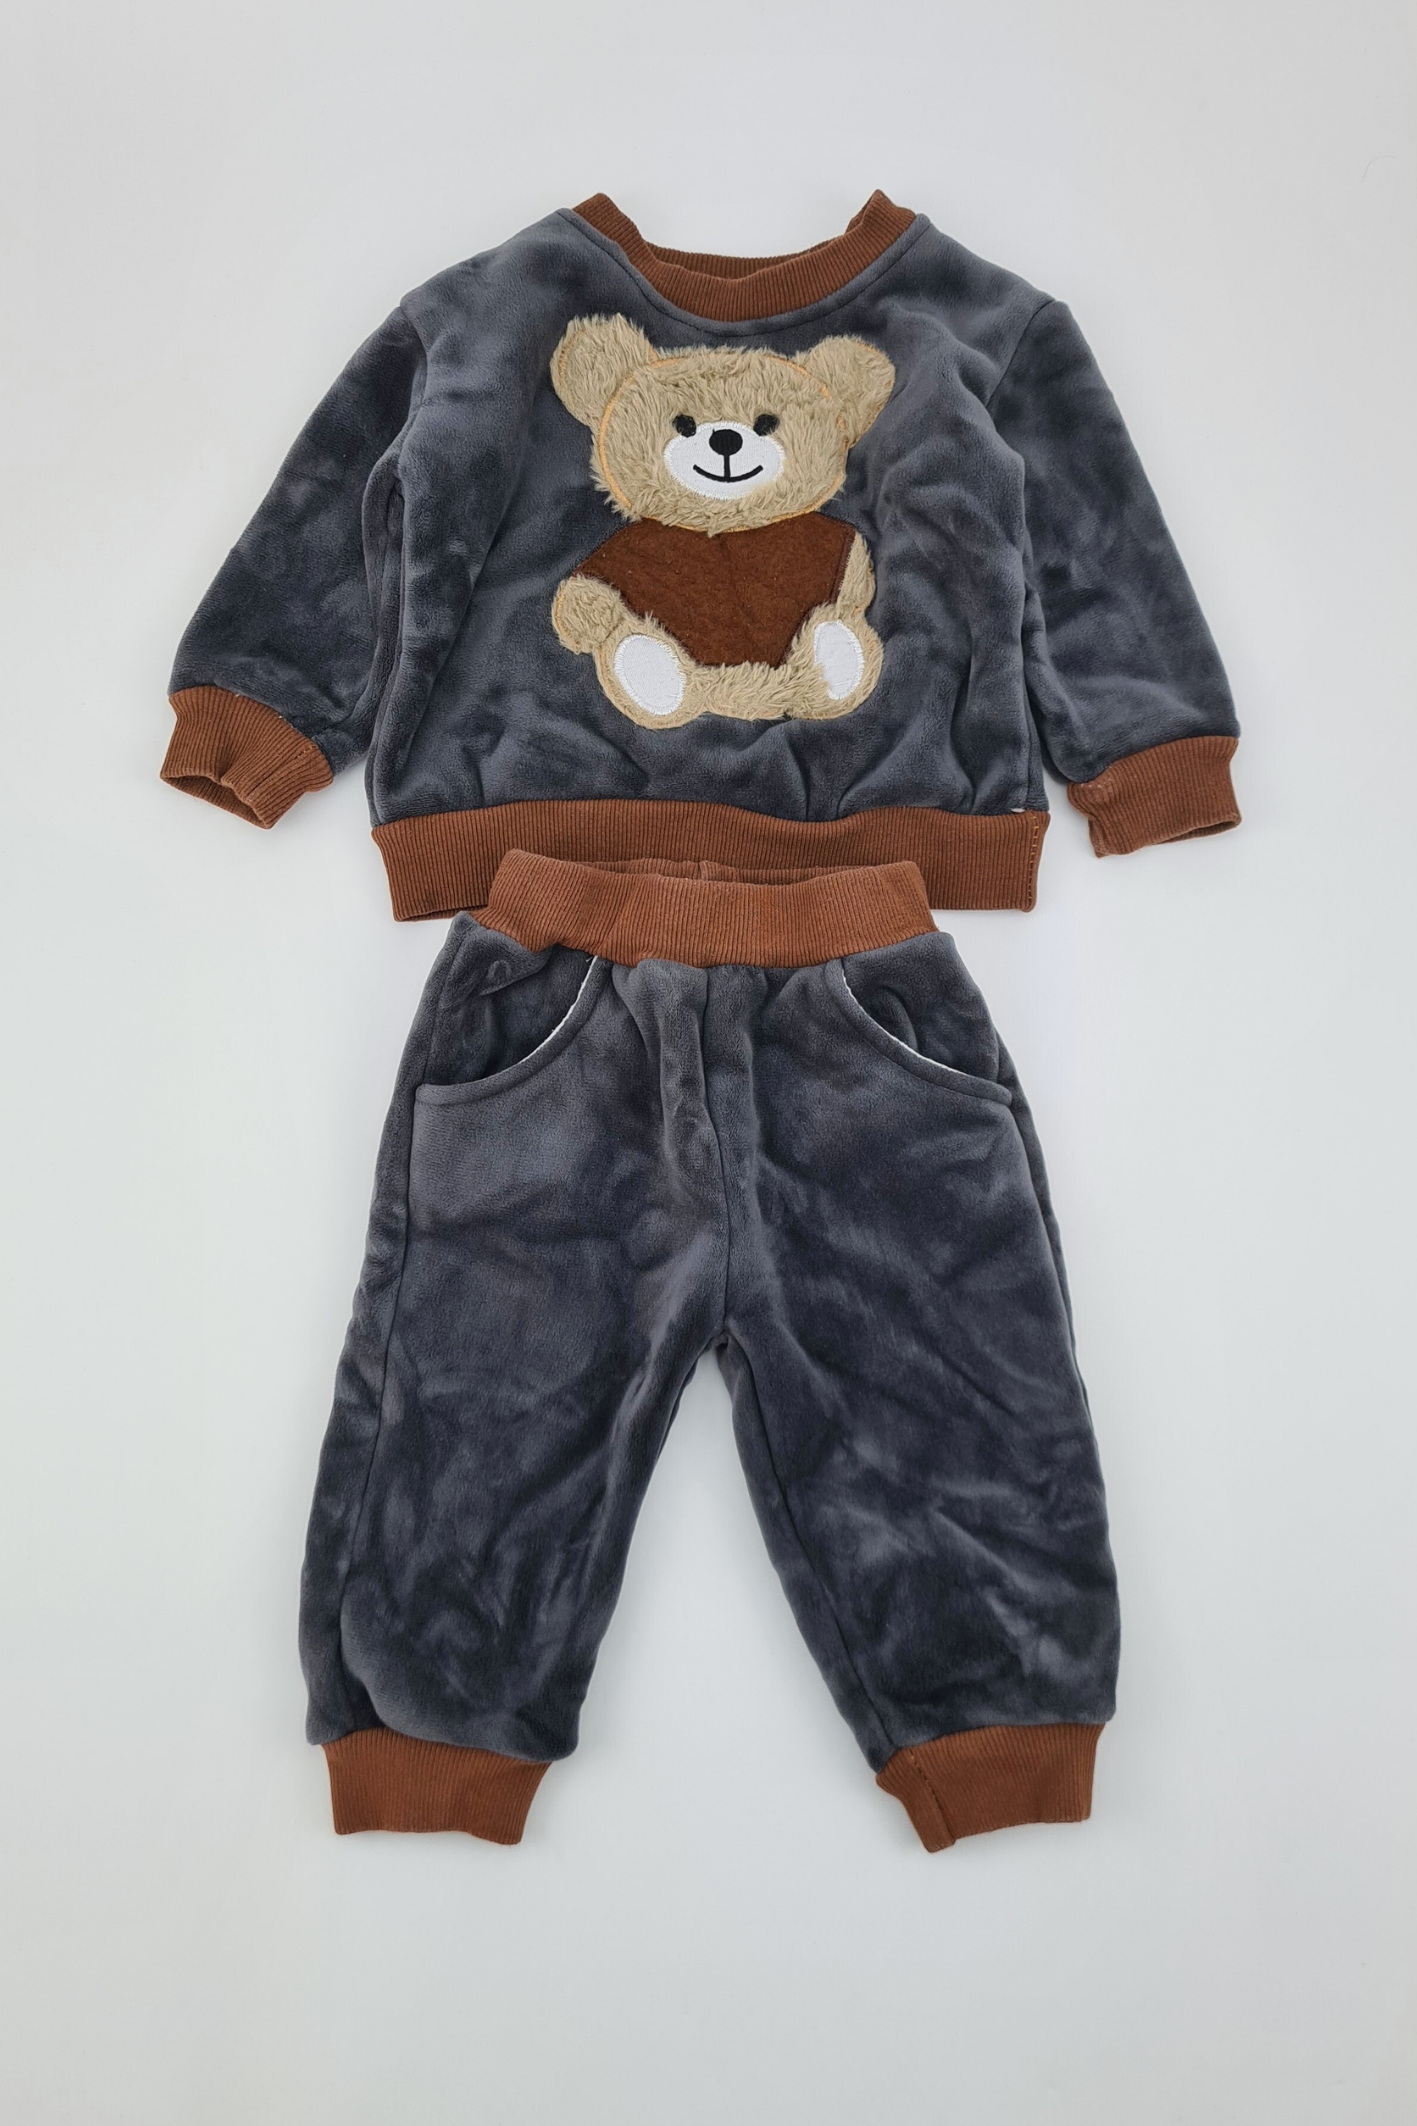 6-9m - Teddy Bear Sweatshirt And Jogger Fleece Outfit

Condition: Like New